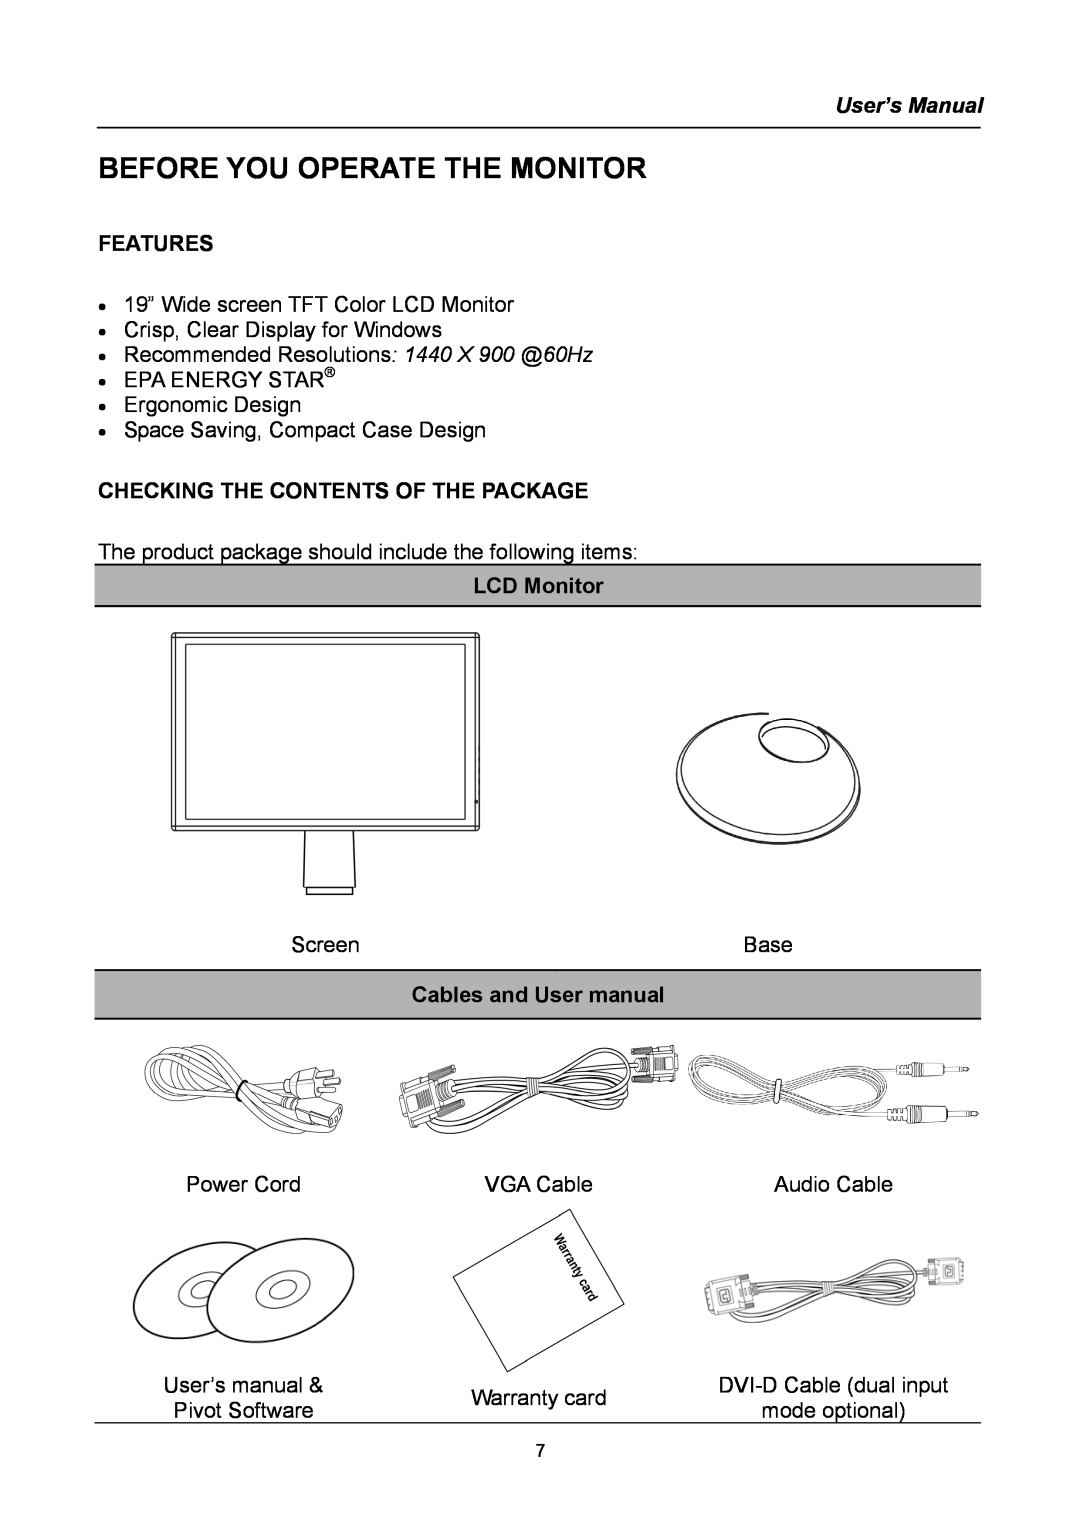 Compaq HW194 Before You Operate The Monitor, User’s Manual, Features, Checking The Contents Of The Package, LCD Monitor 